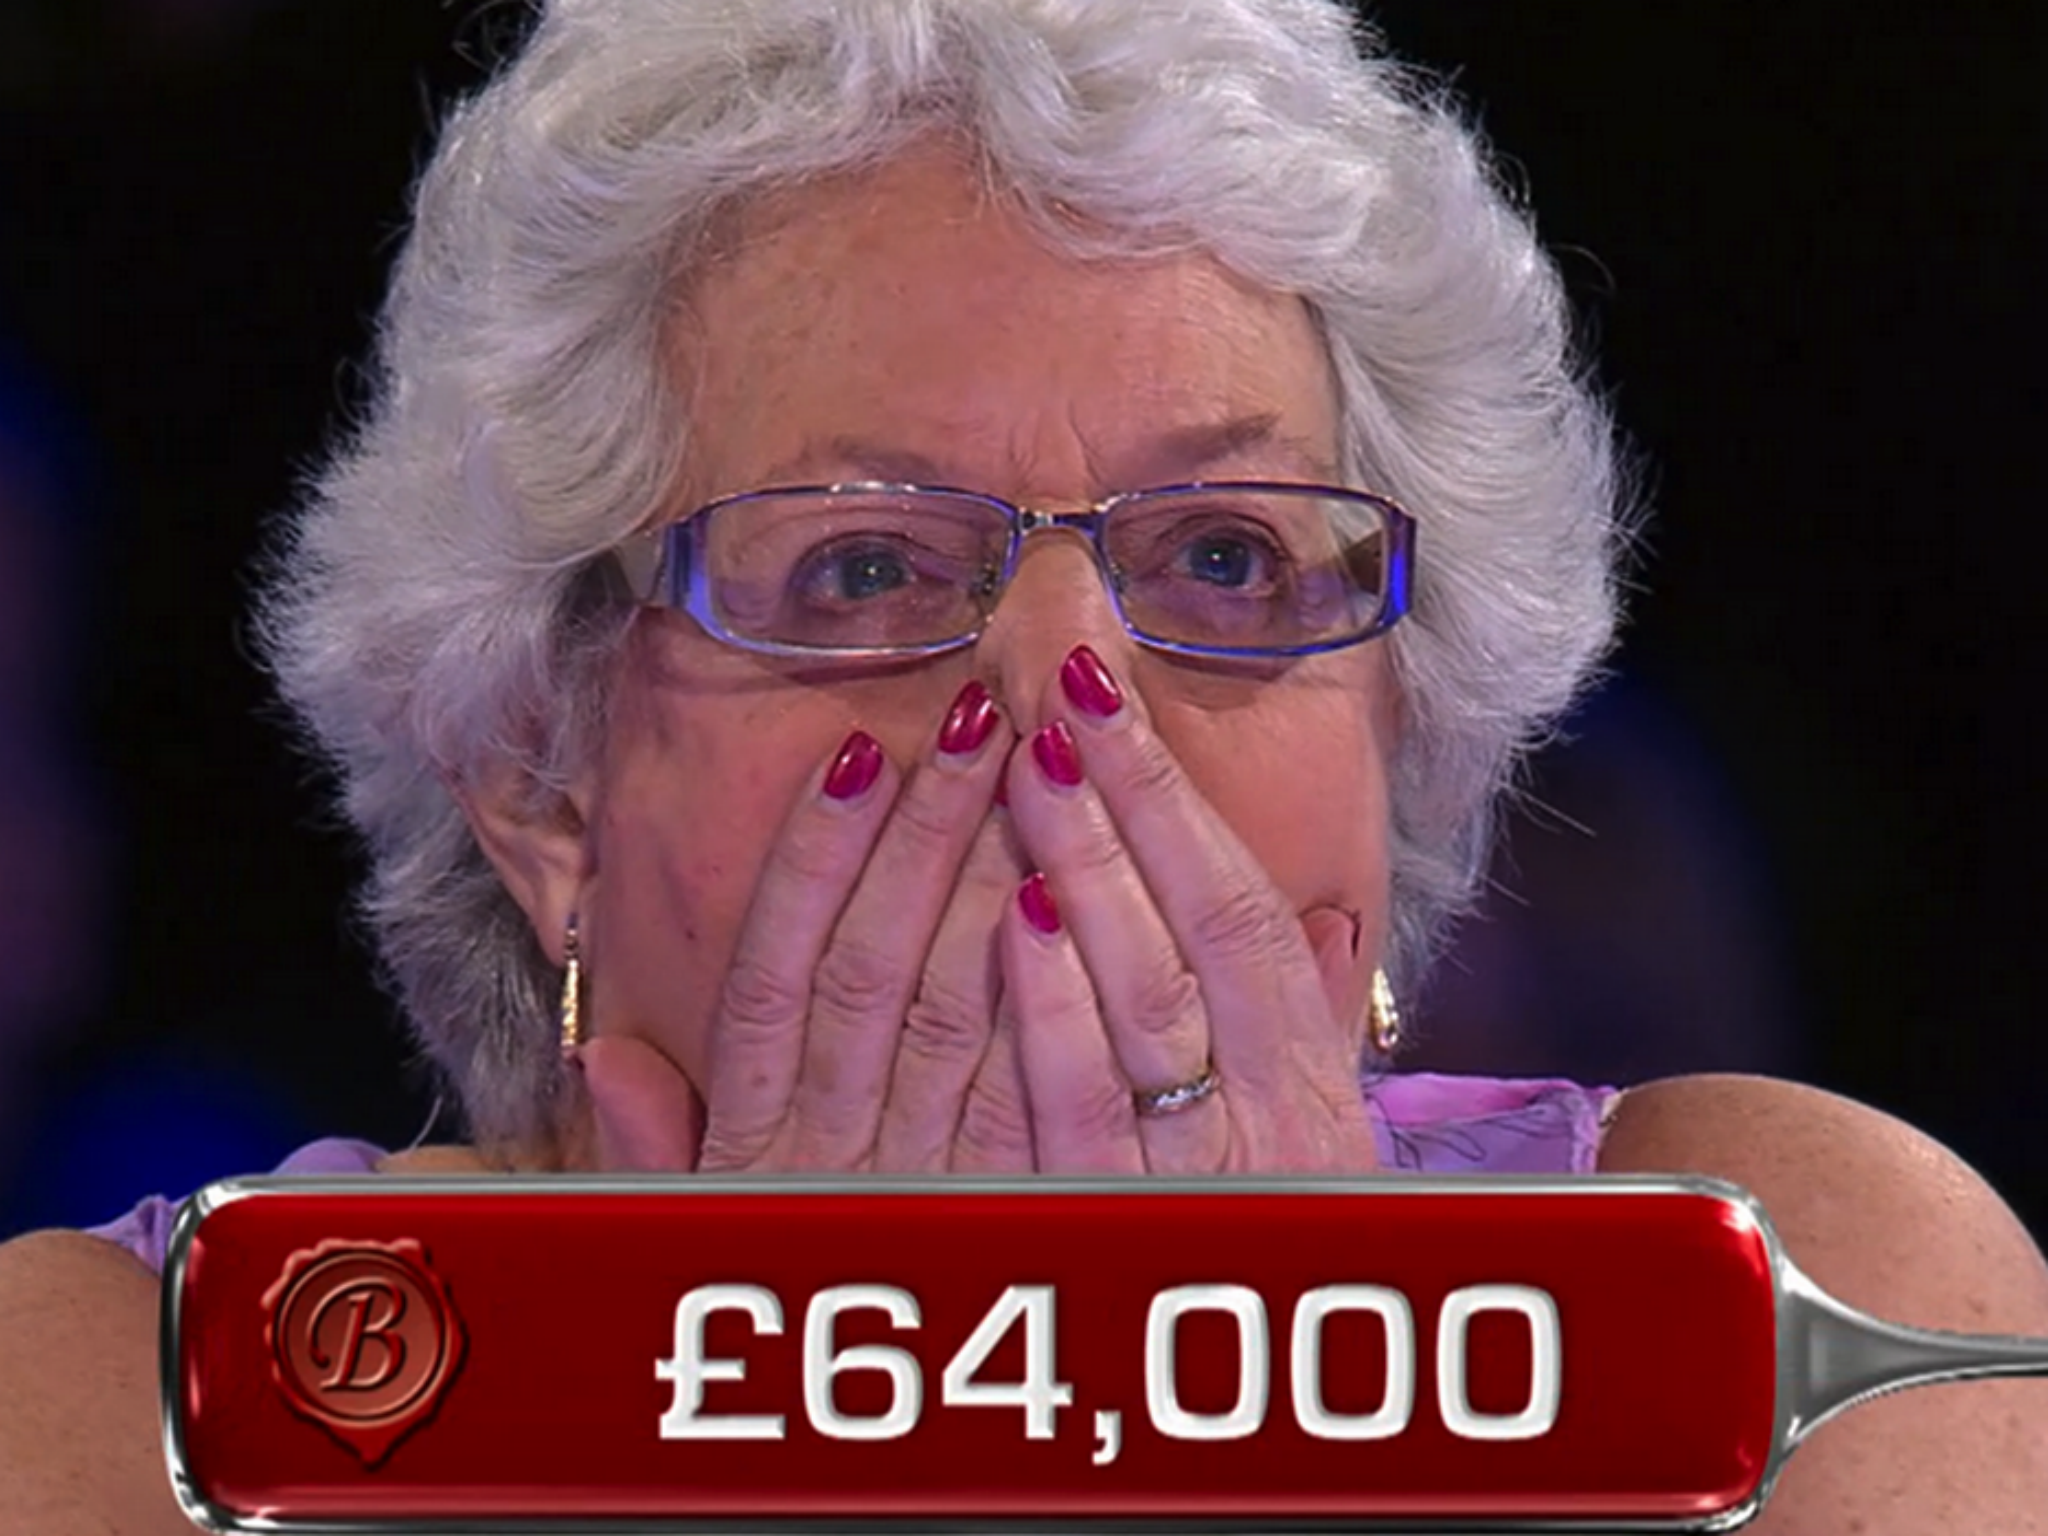 Ann Crawford is offered £64,000 by the banker before choosing to gamble